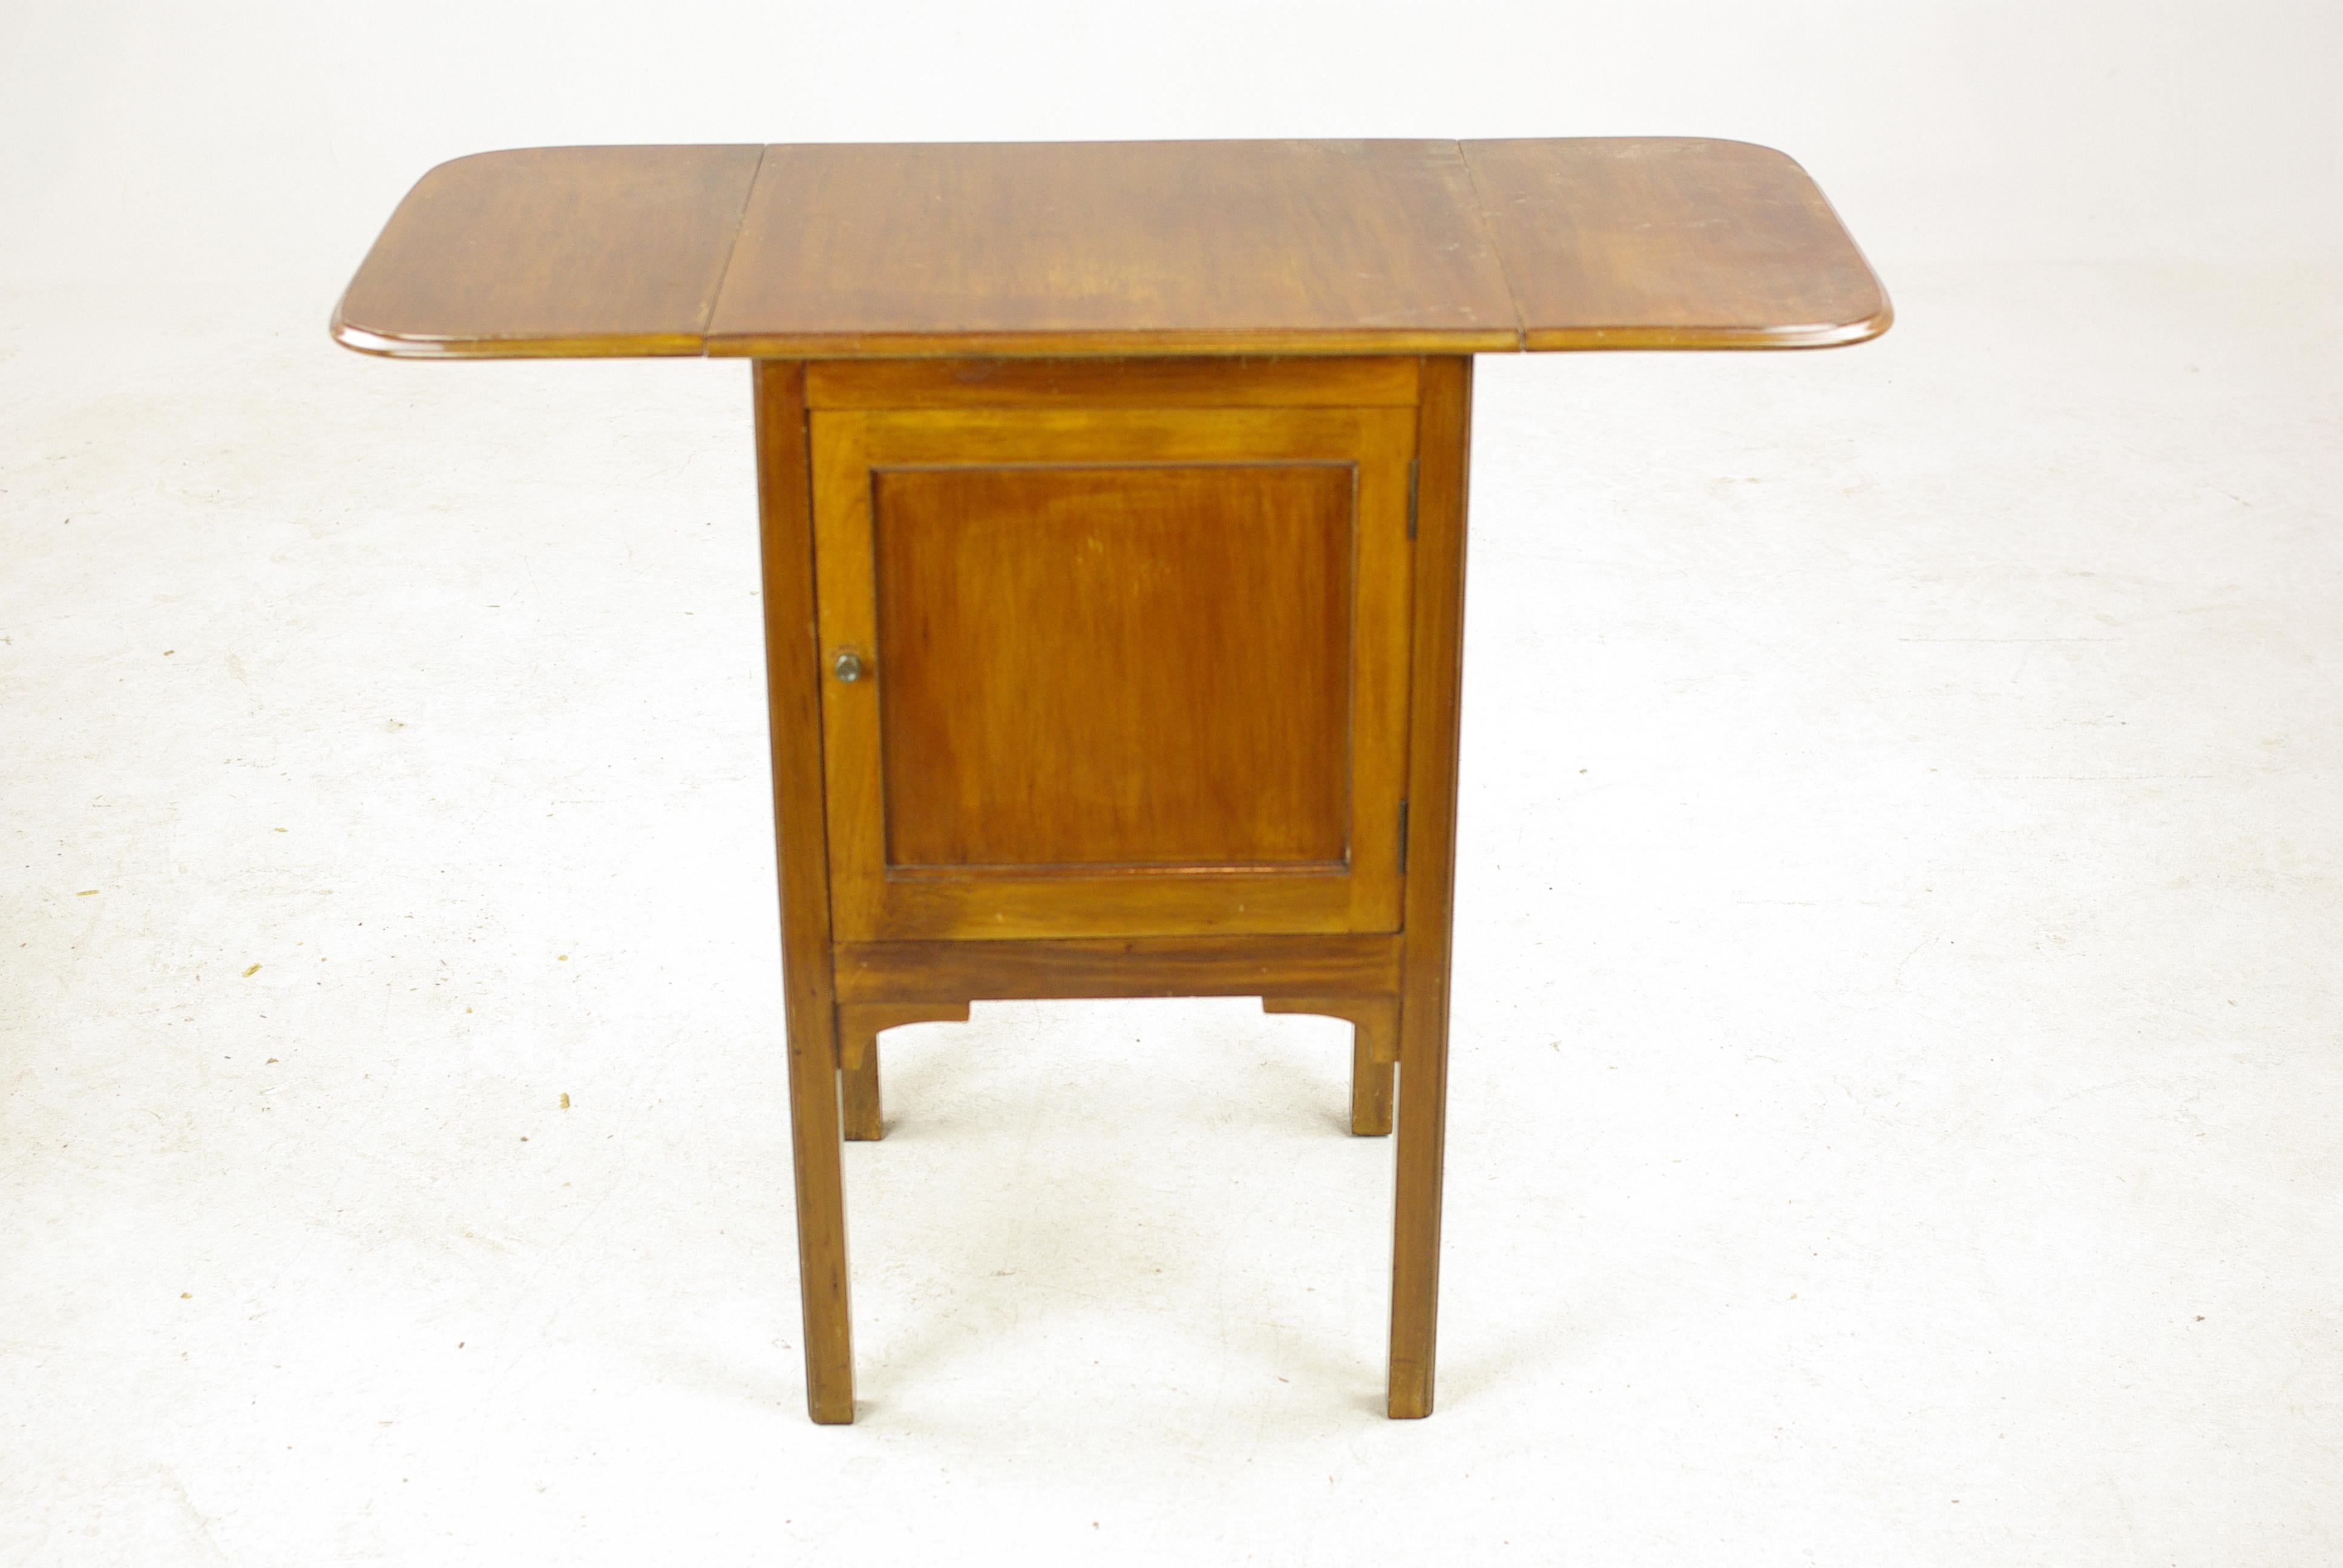 Vintage walnut nightstand, lamp table, bedside, end table with drop leaves, Scotland 1930, Antique Furniture, H029

Scotland 1930
Solid walnut
Original finish
Rectangular top
Pair of drop leaves to sides
Single cupboard
Original hardware
Ending on